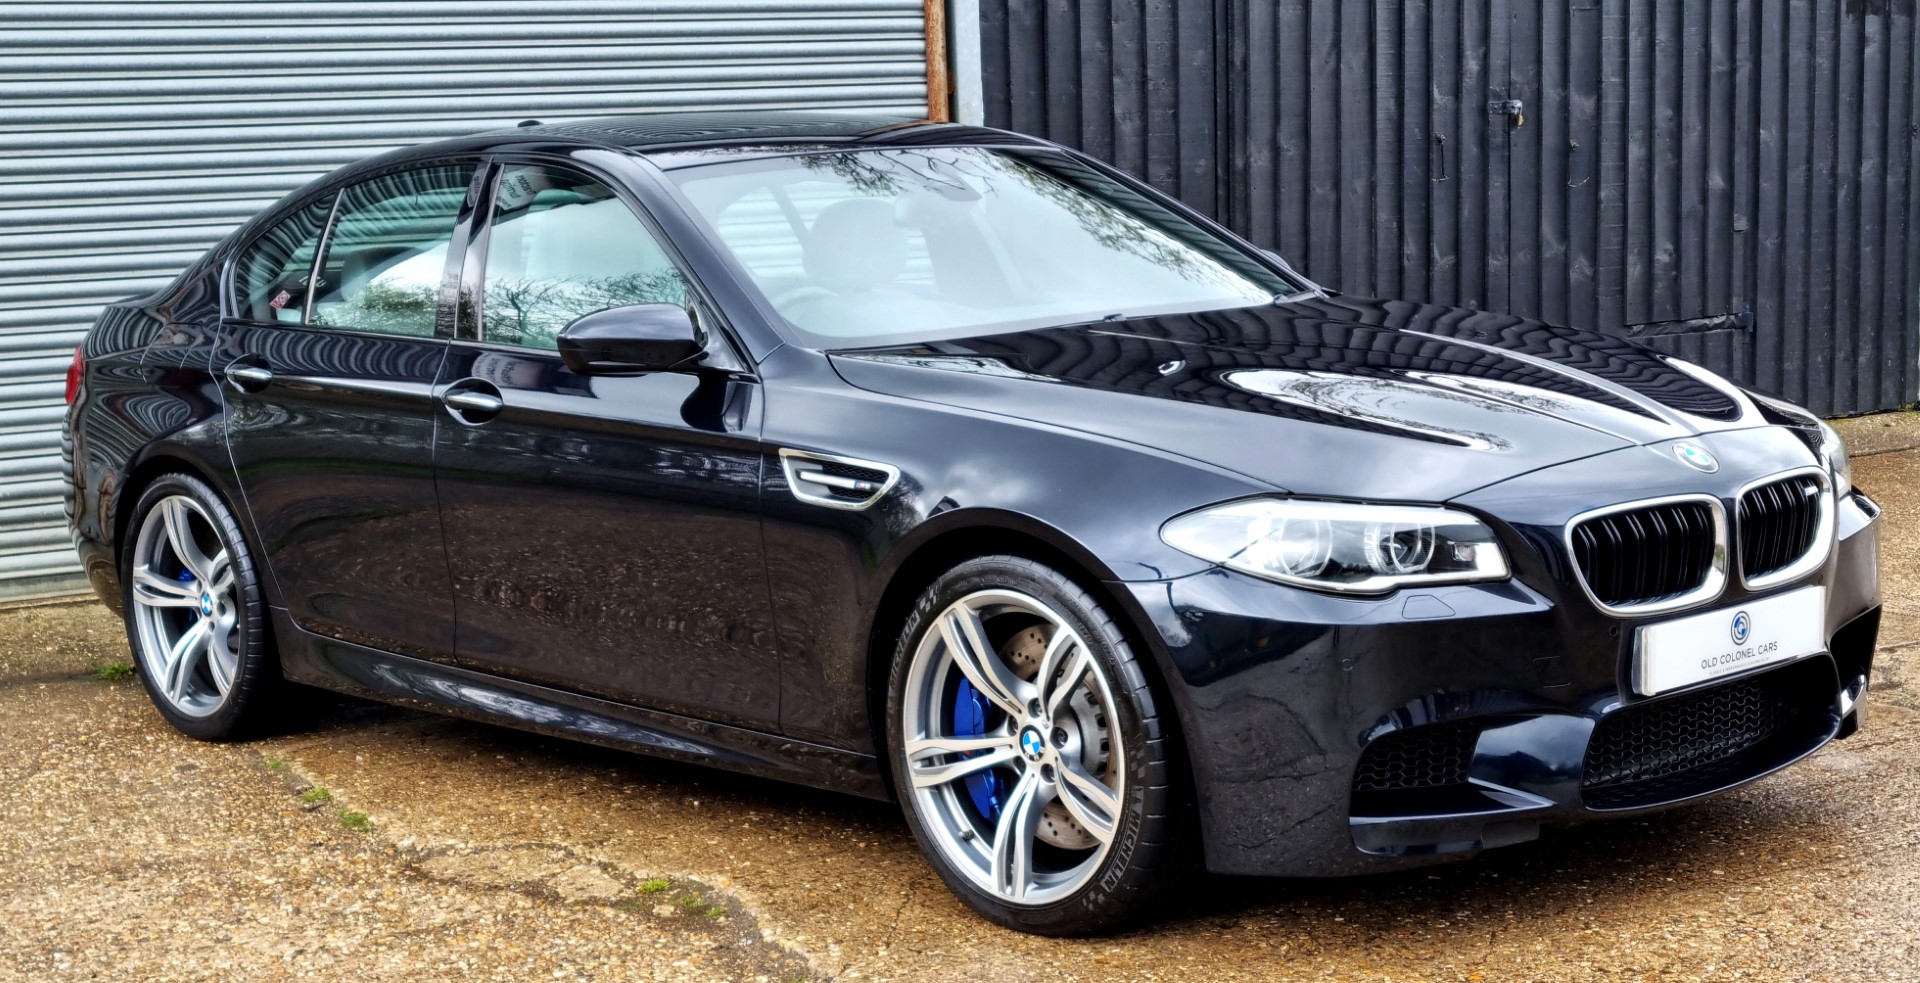 BMW F10 M5 LCI - 4.4 TWIN TURBO V8 - 7 SPEED DCT - Old Colonel Cars - Old  Colonel Cars